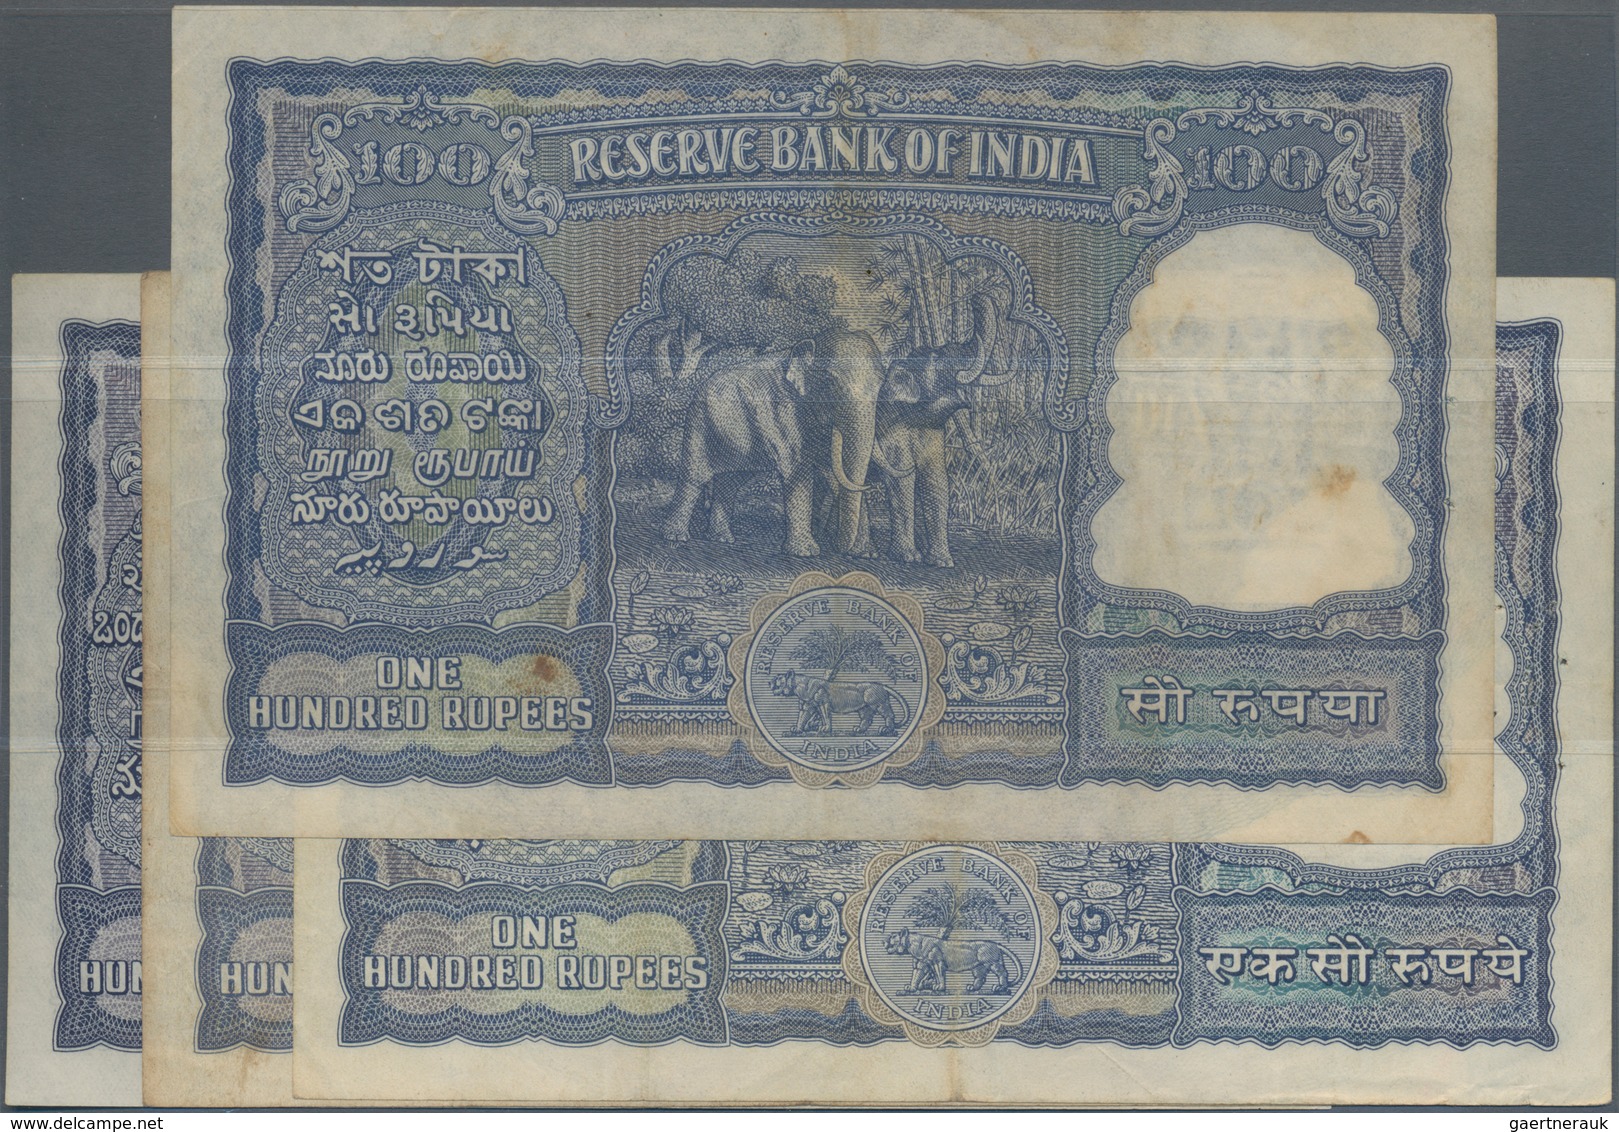 India / Indien: Set Of 4 Notes 100 Rupees ND P. 42a,b & 43a,c, All Used With Light Folds And Pinhole - India